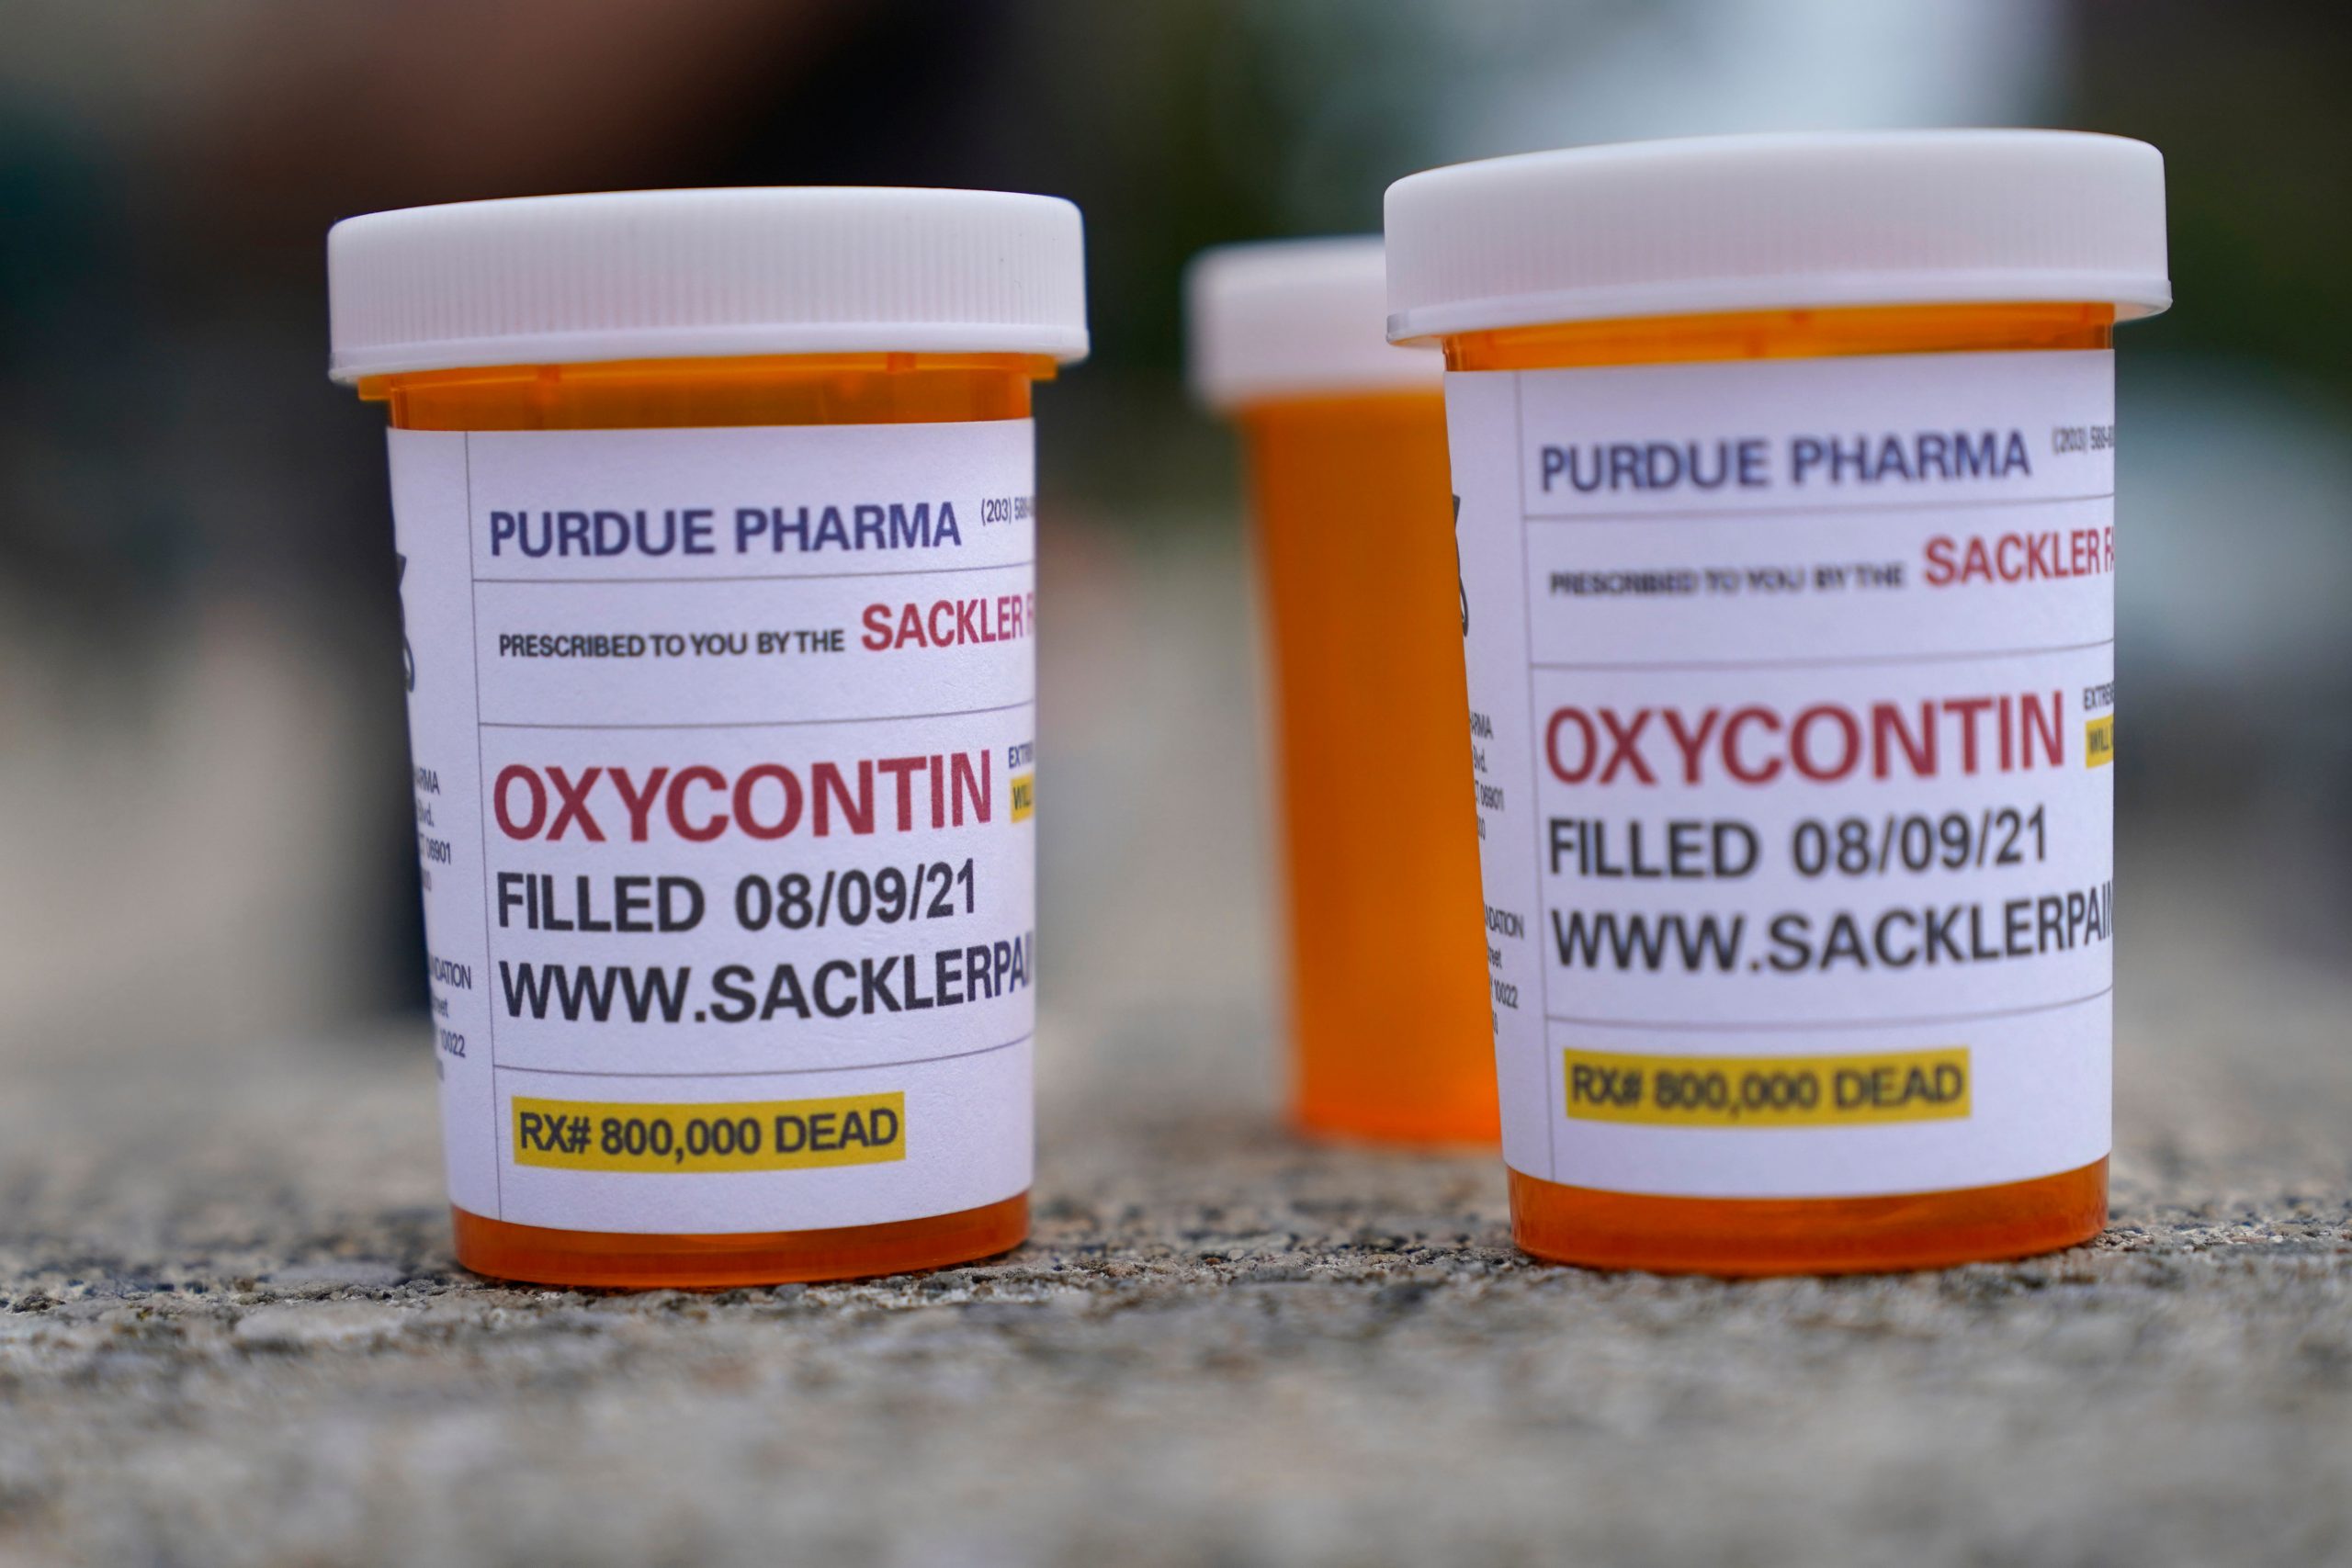 Purdue Pharma, Sackler reach $6 bln opioid settlement with US states